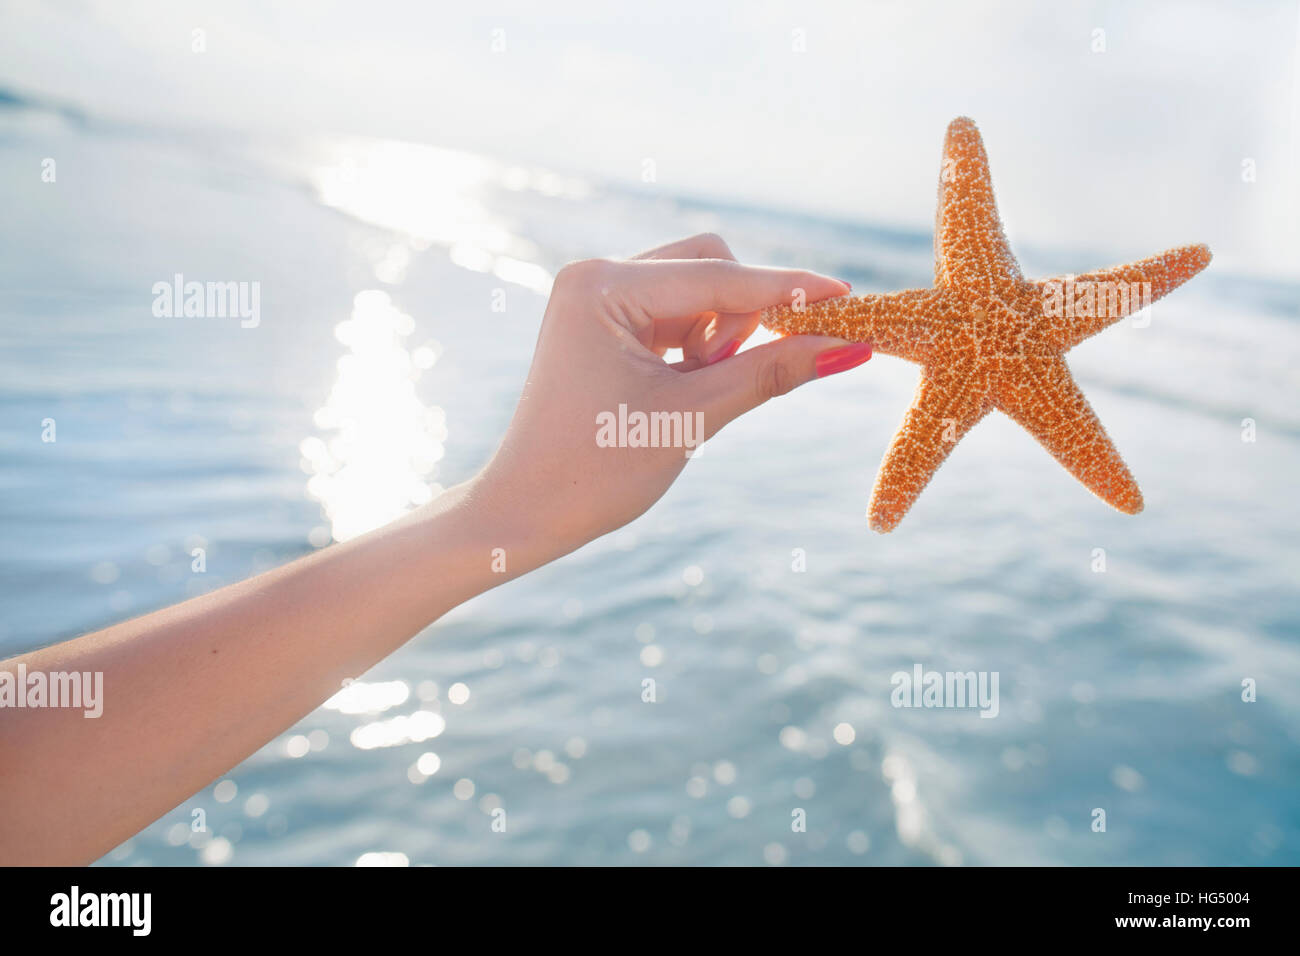 Woman holding starfish at the beach Banque D'Images